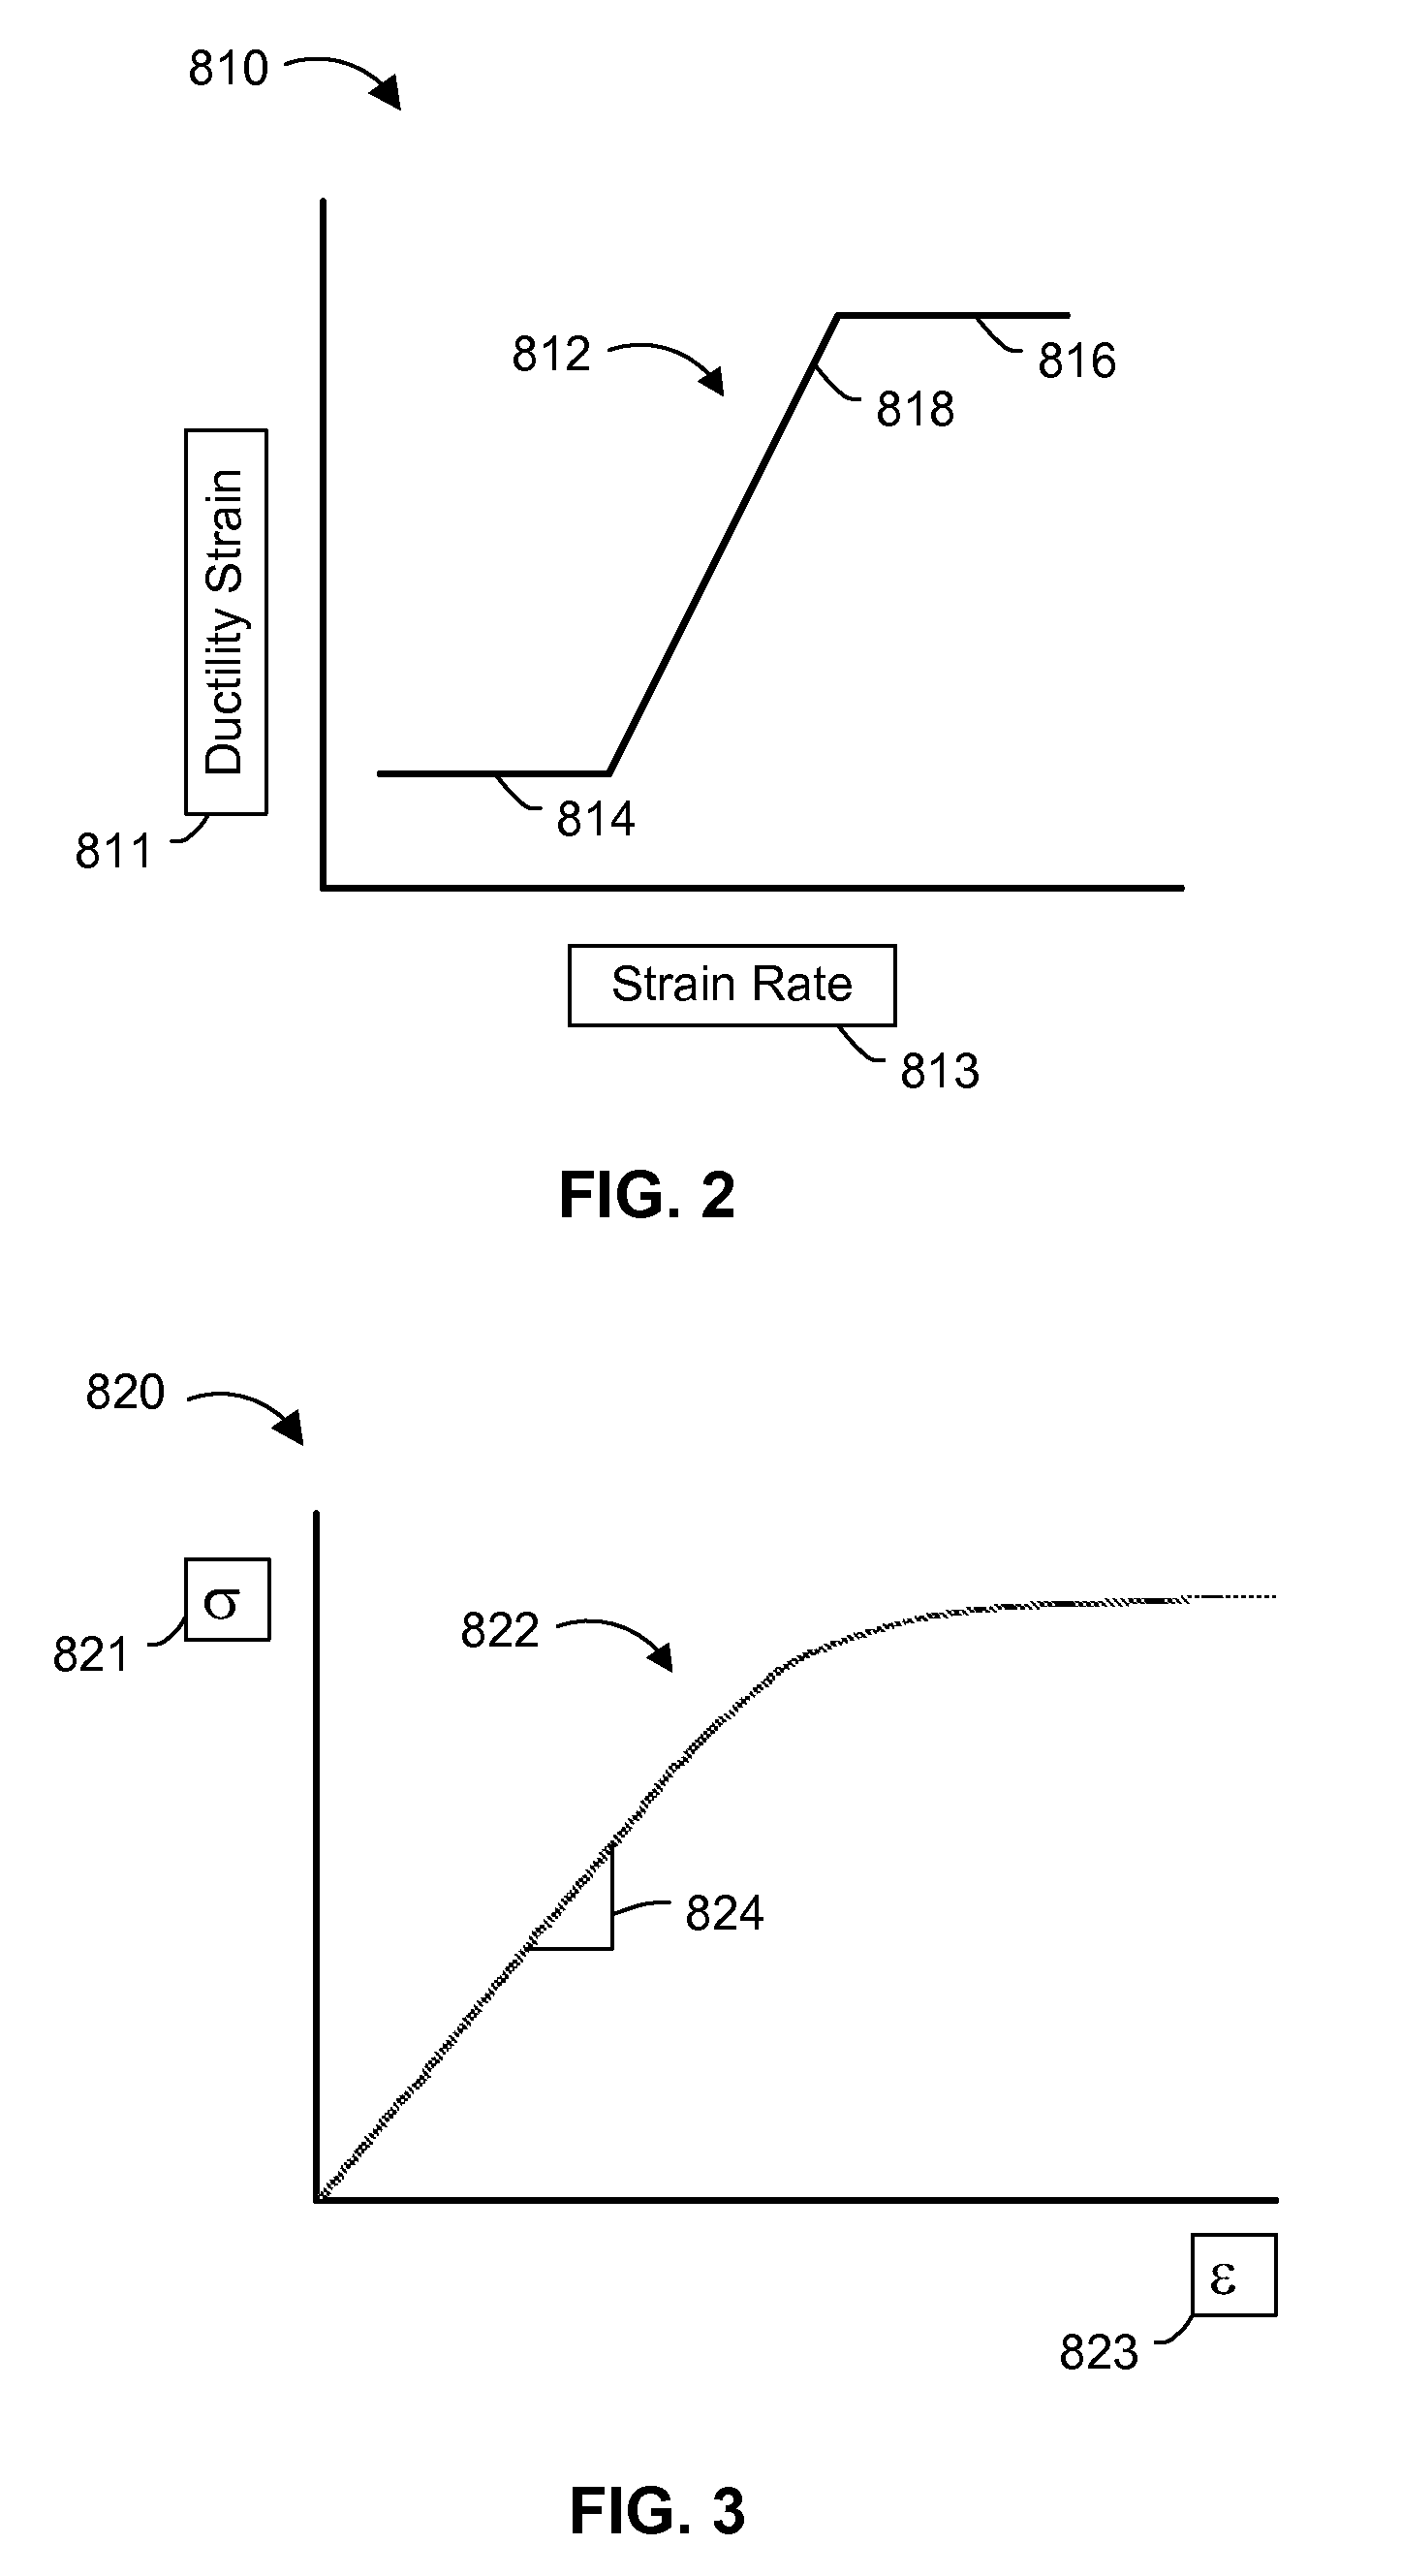 Condition based lifing of gas turbine engine components